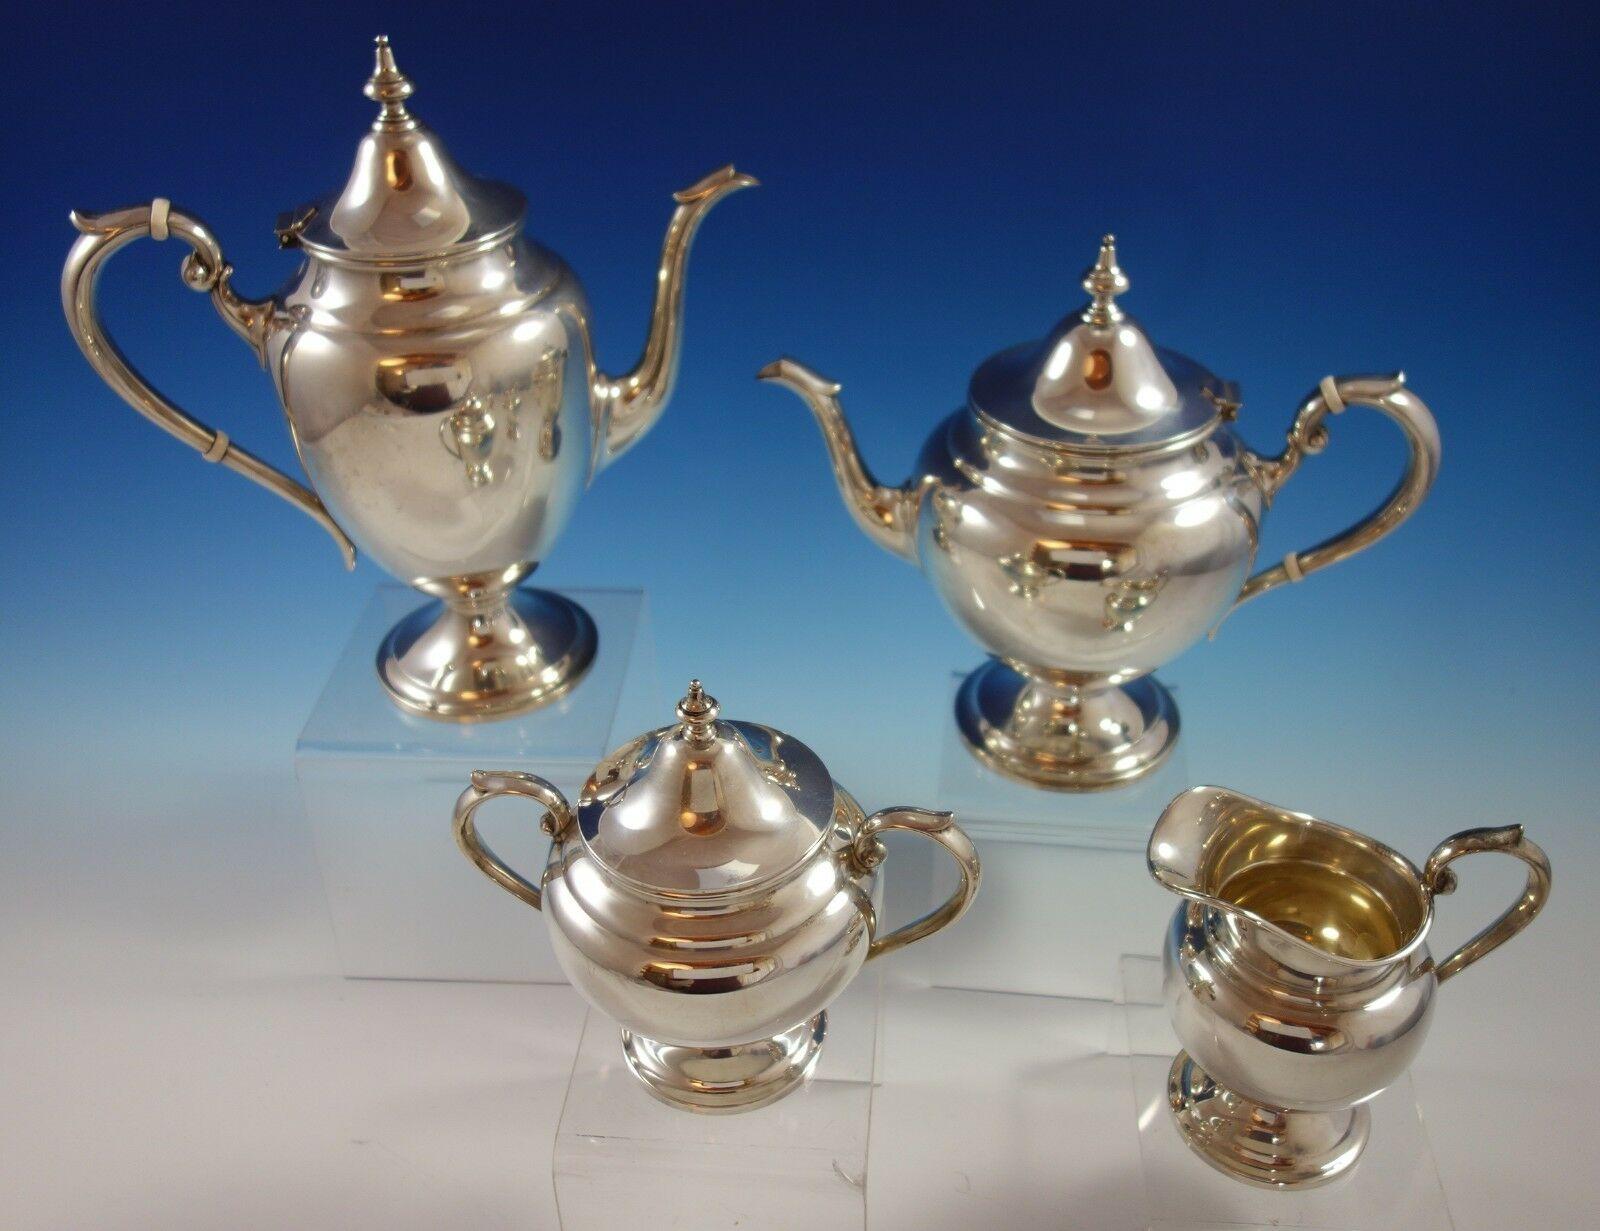 Puritan by Gorham

Gorgeous Puritan by Gorham sterling silver 4-piece tea set. The set includes:

1 - Coffee pot: Marked #451, holds 2 3/4 pints, measures: 9 3/4